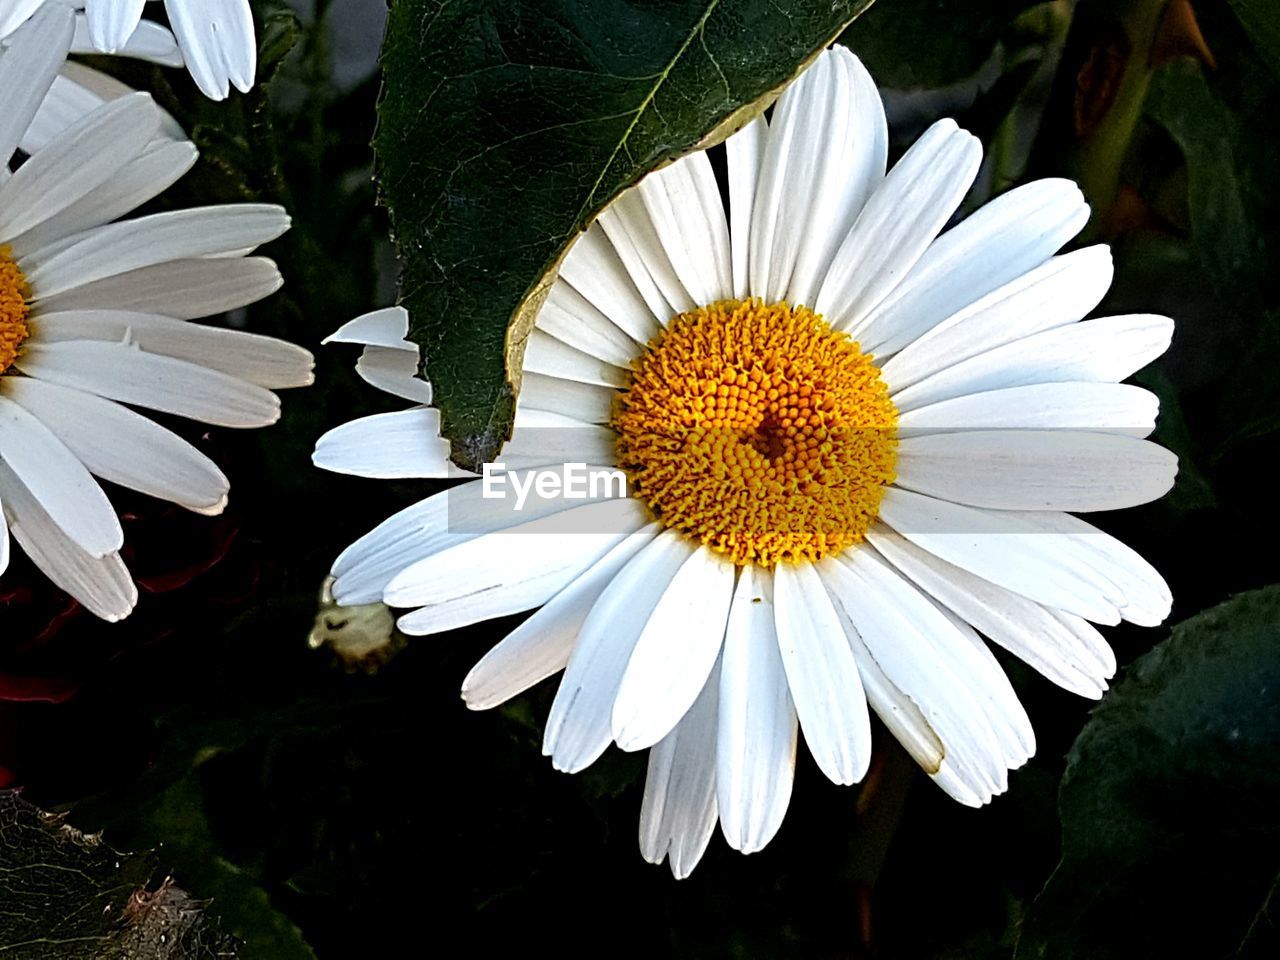 Close-up of shasta daisy growing on plant